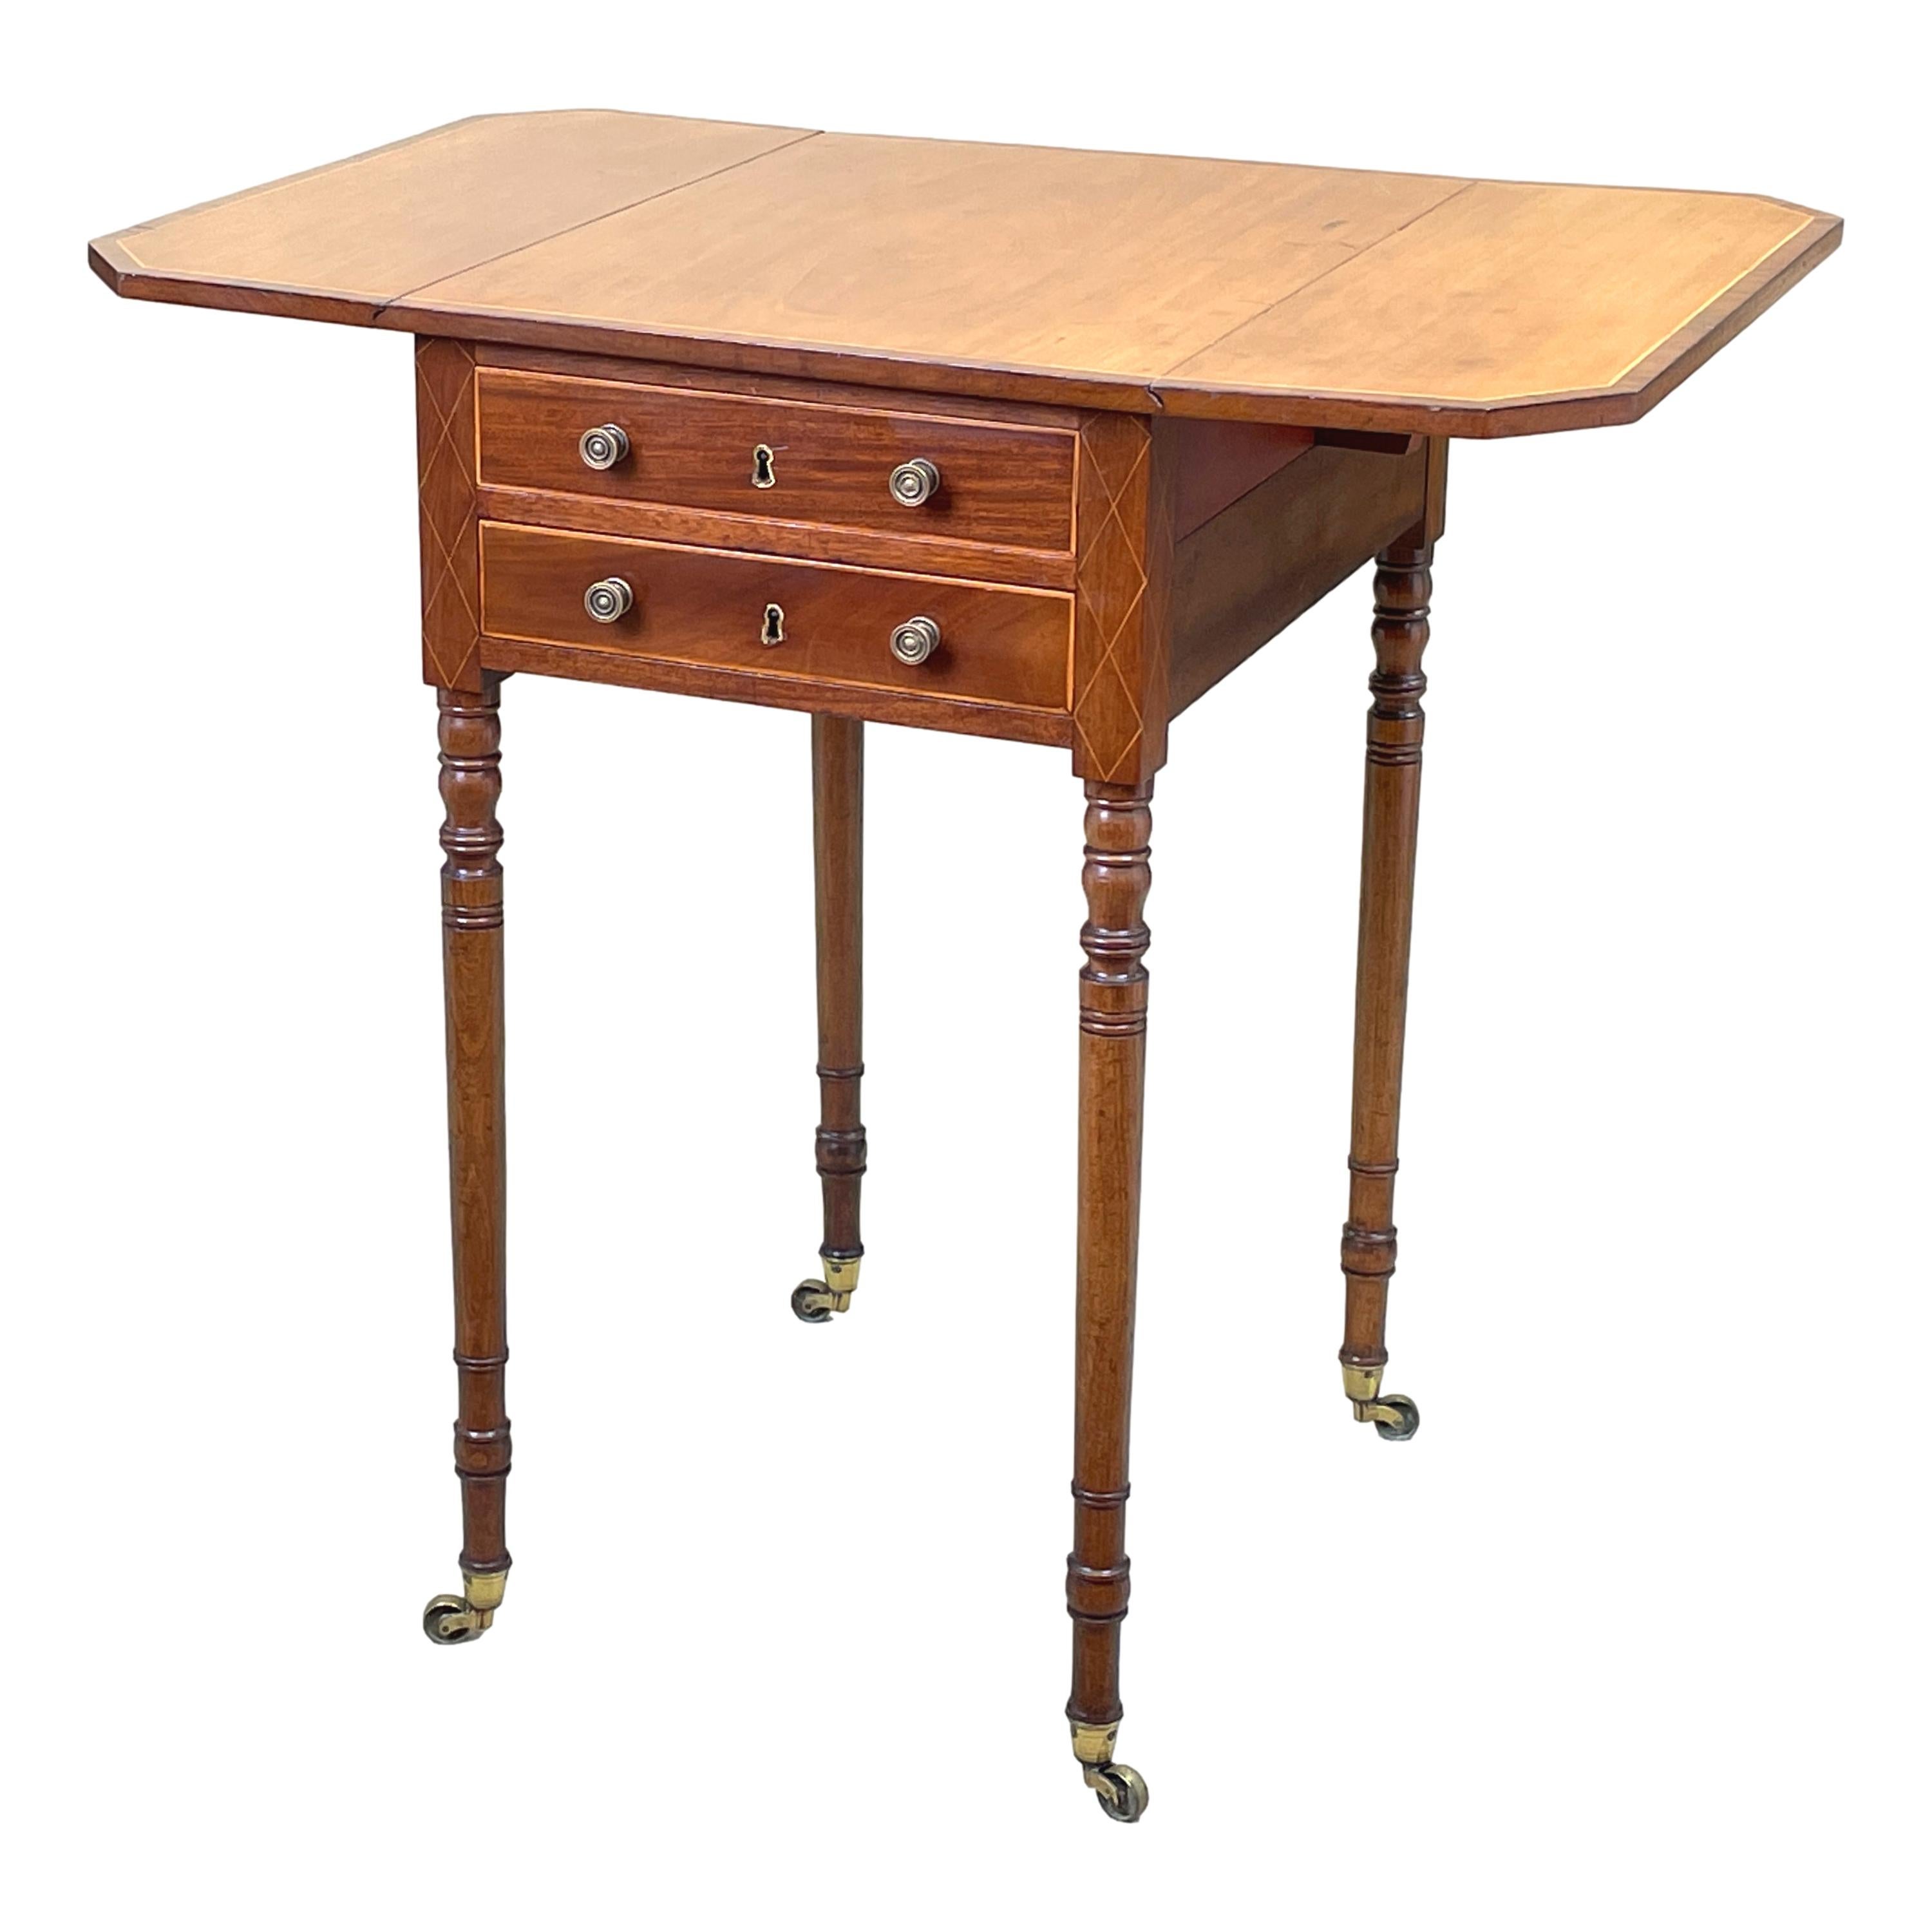 Georgian Mahogany Baby Pembroke Table In Good Condition For Sale In Bedfordshire, GB